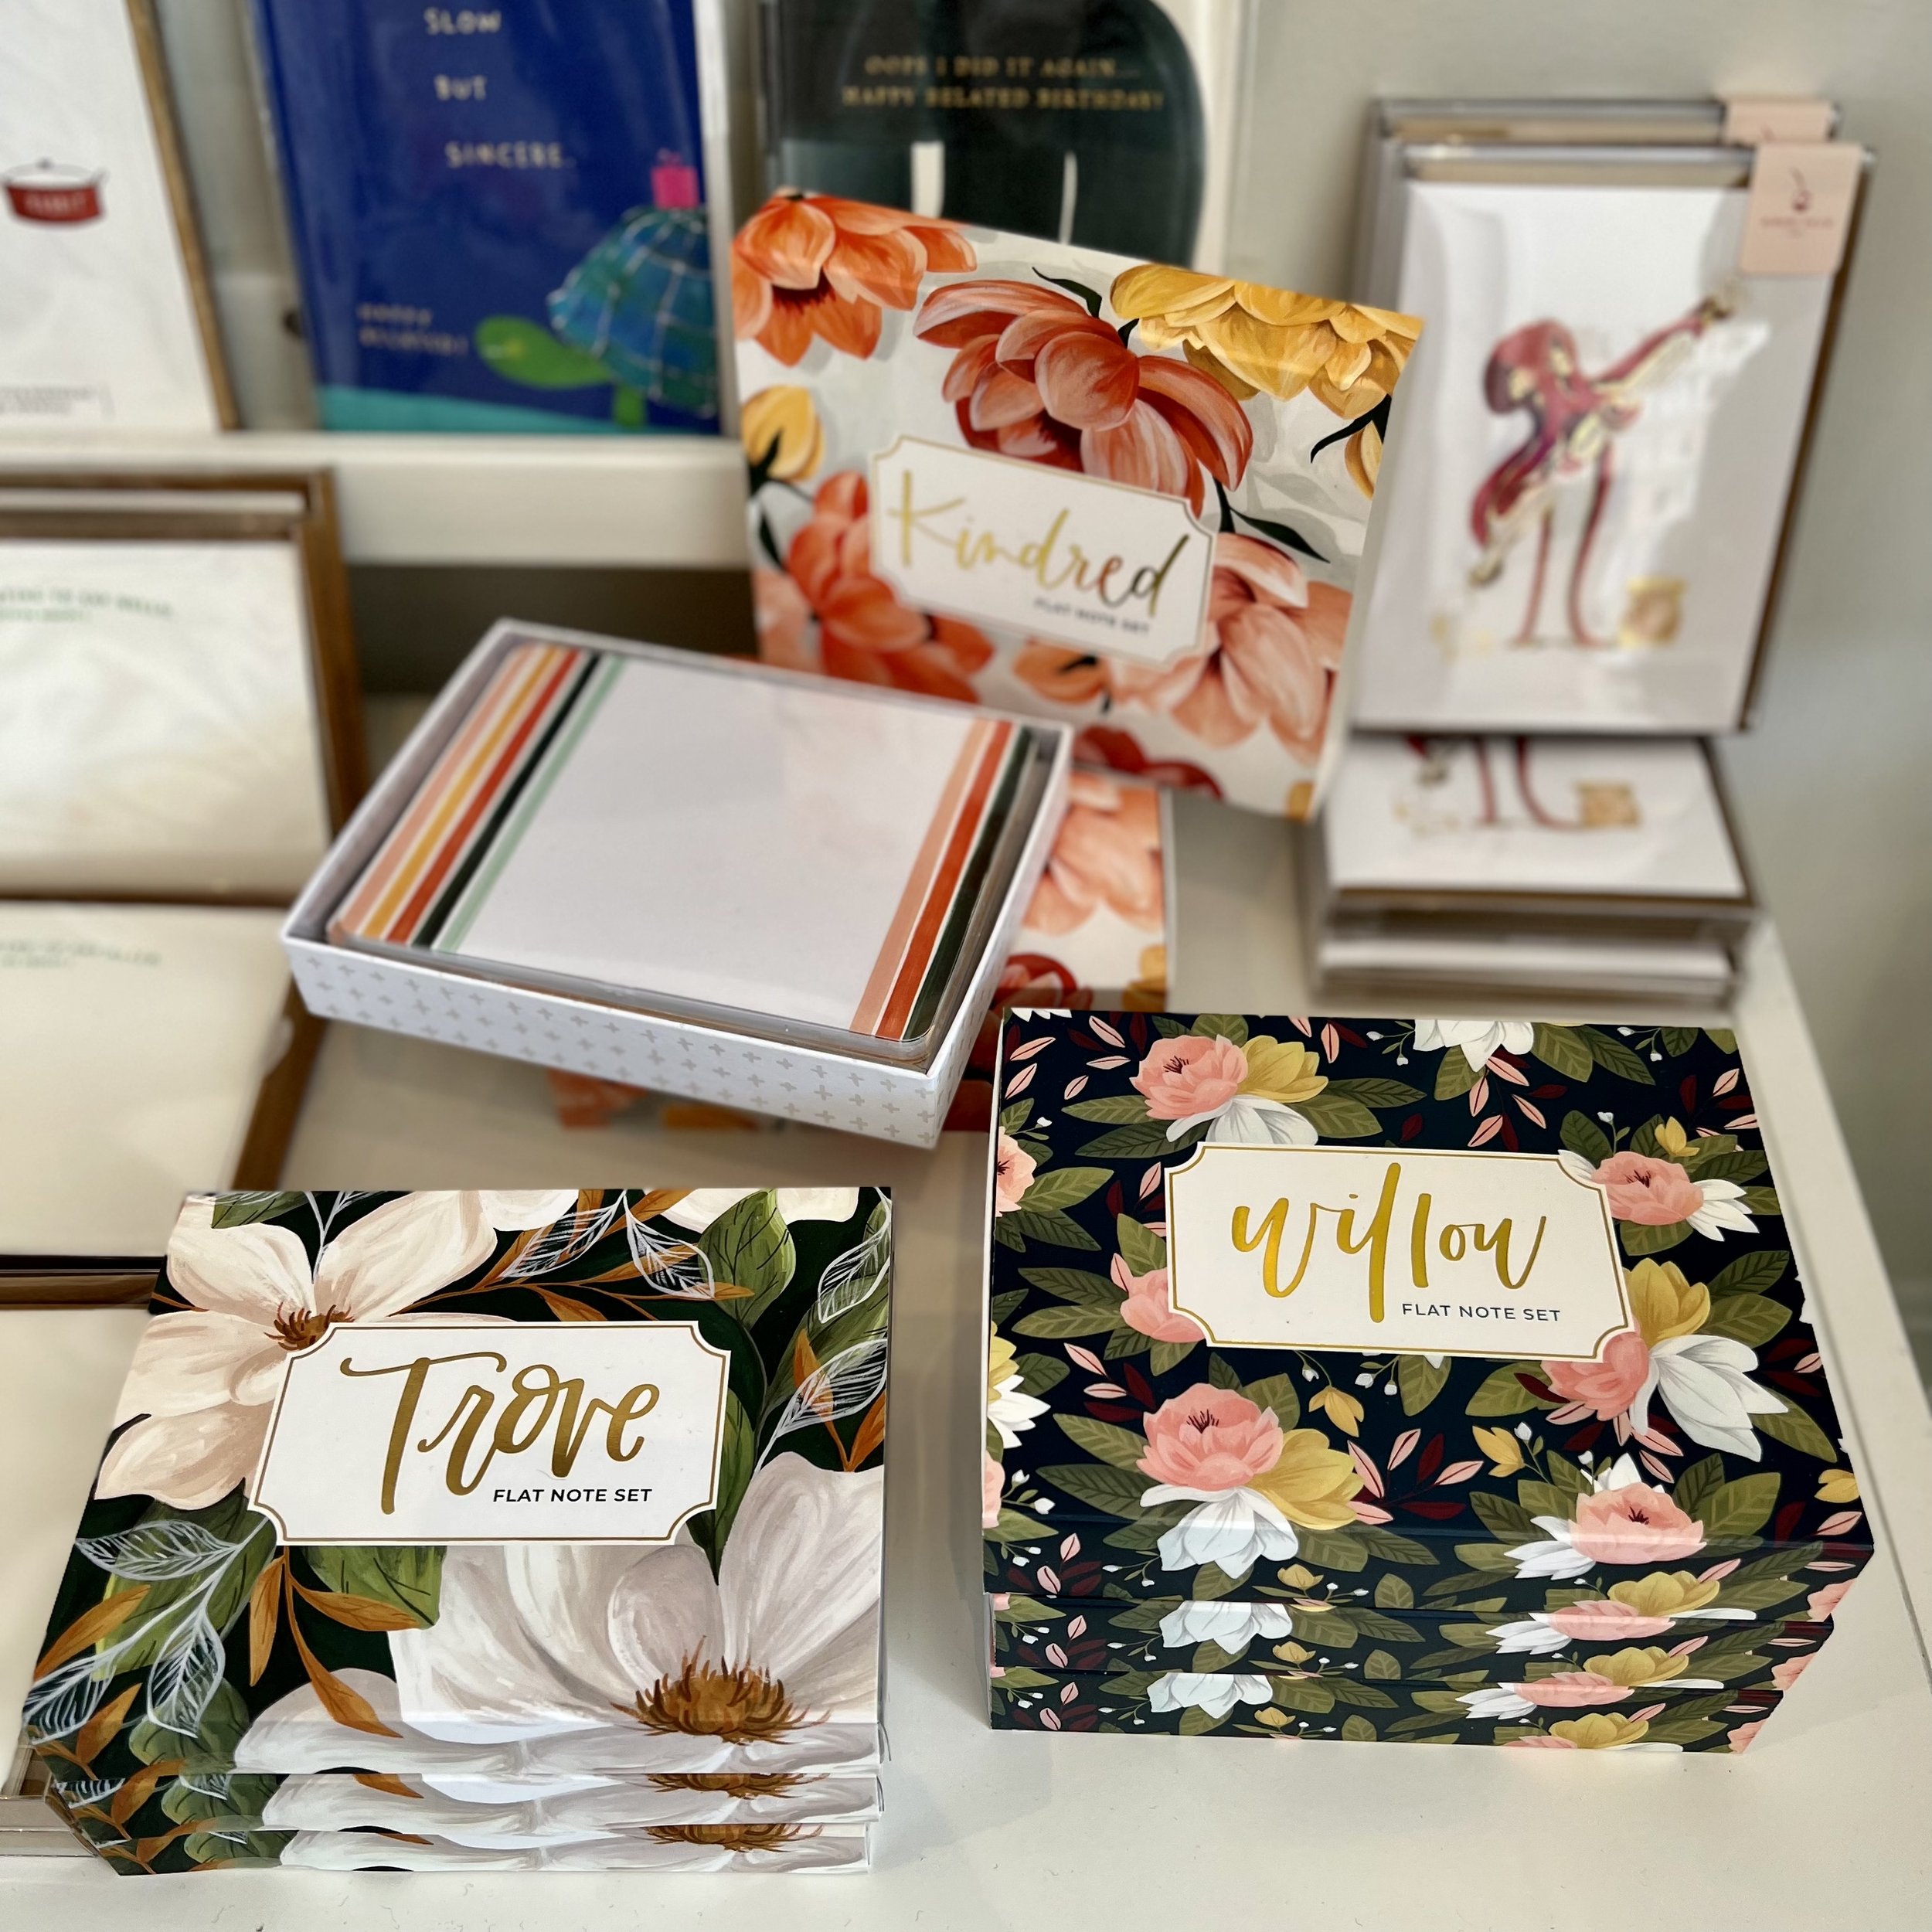 Boxed stationery sets at Poeme